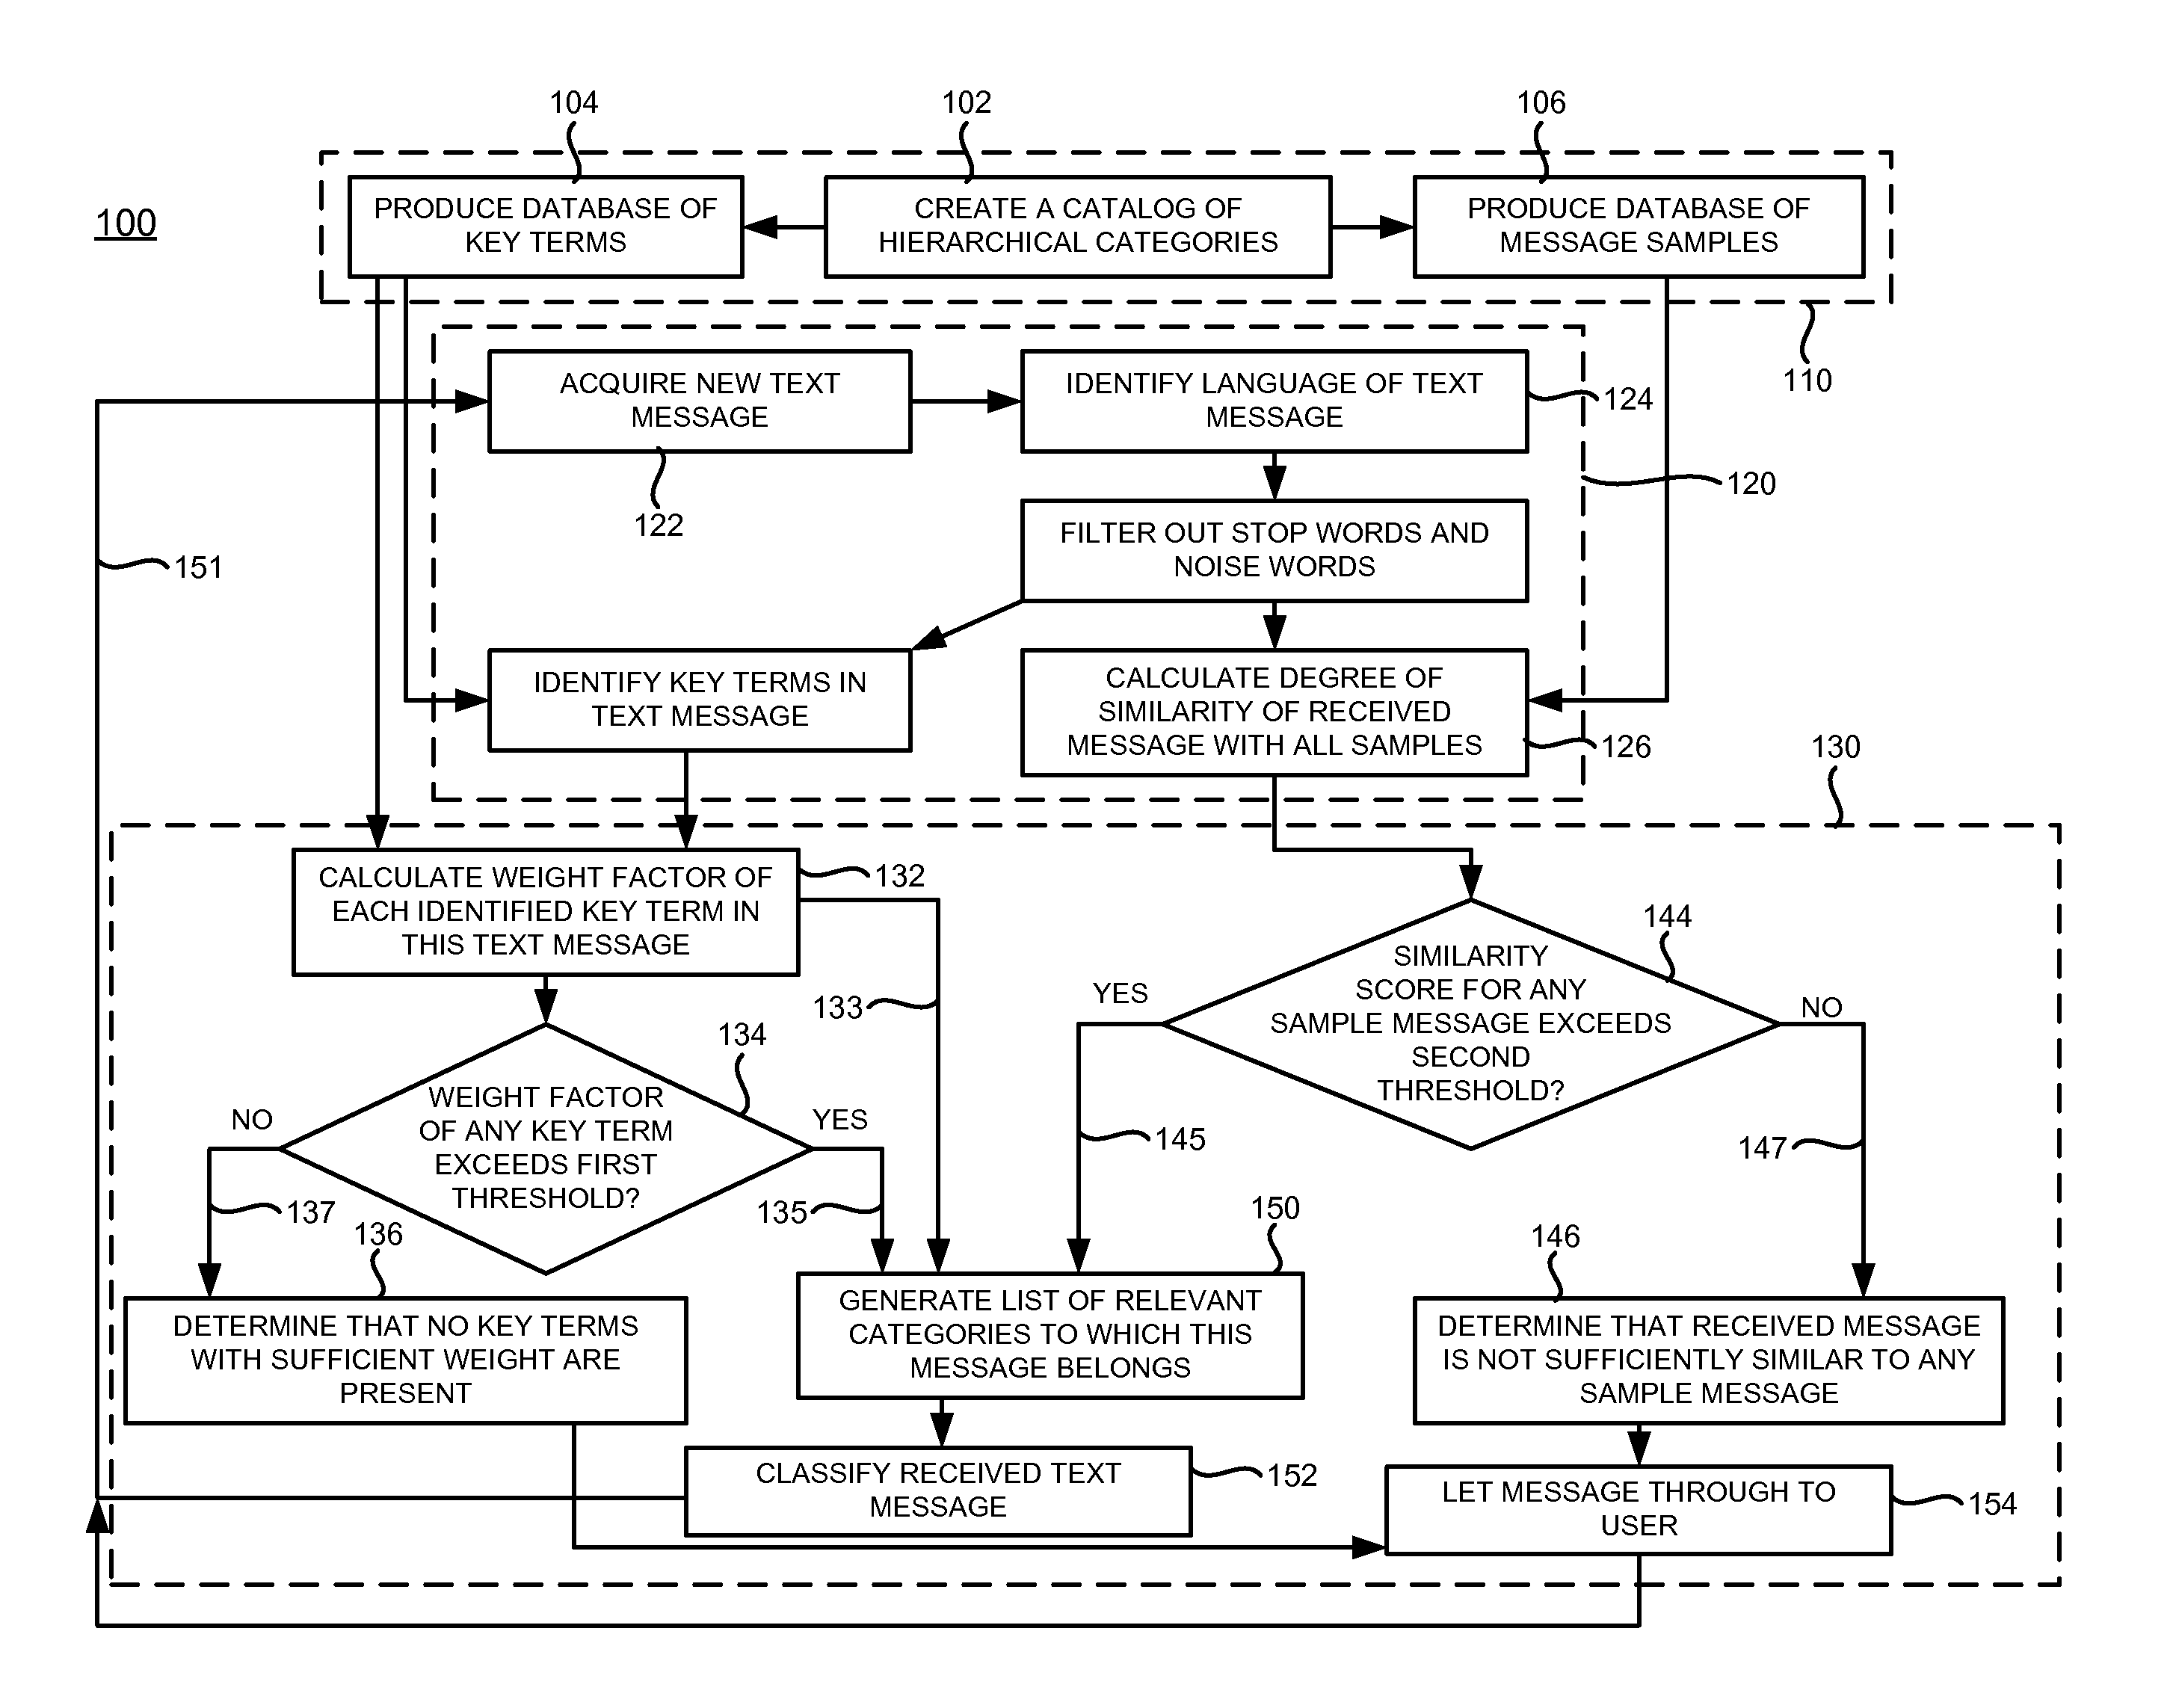 Method and system for classifying electronic text messages and spam messages